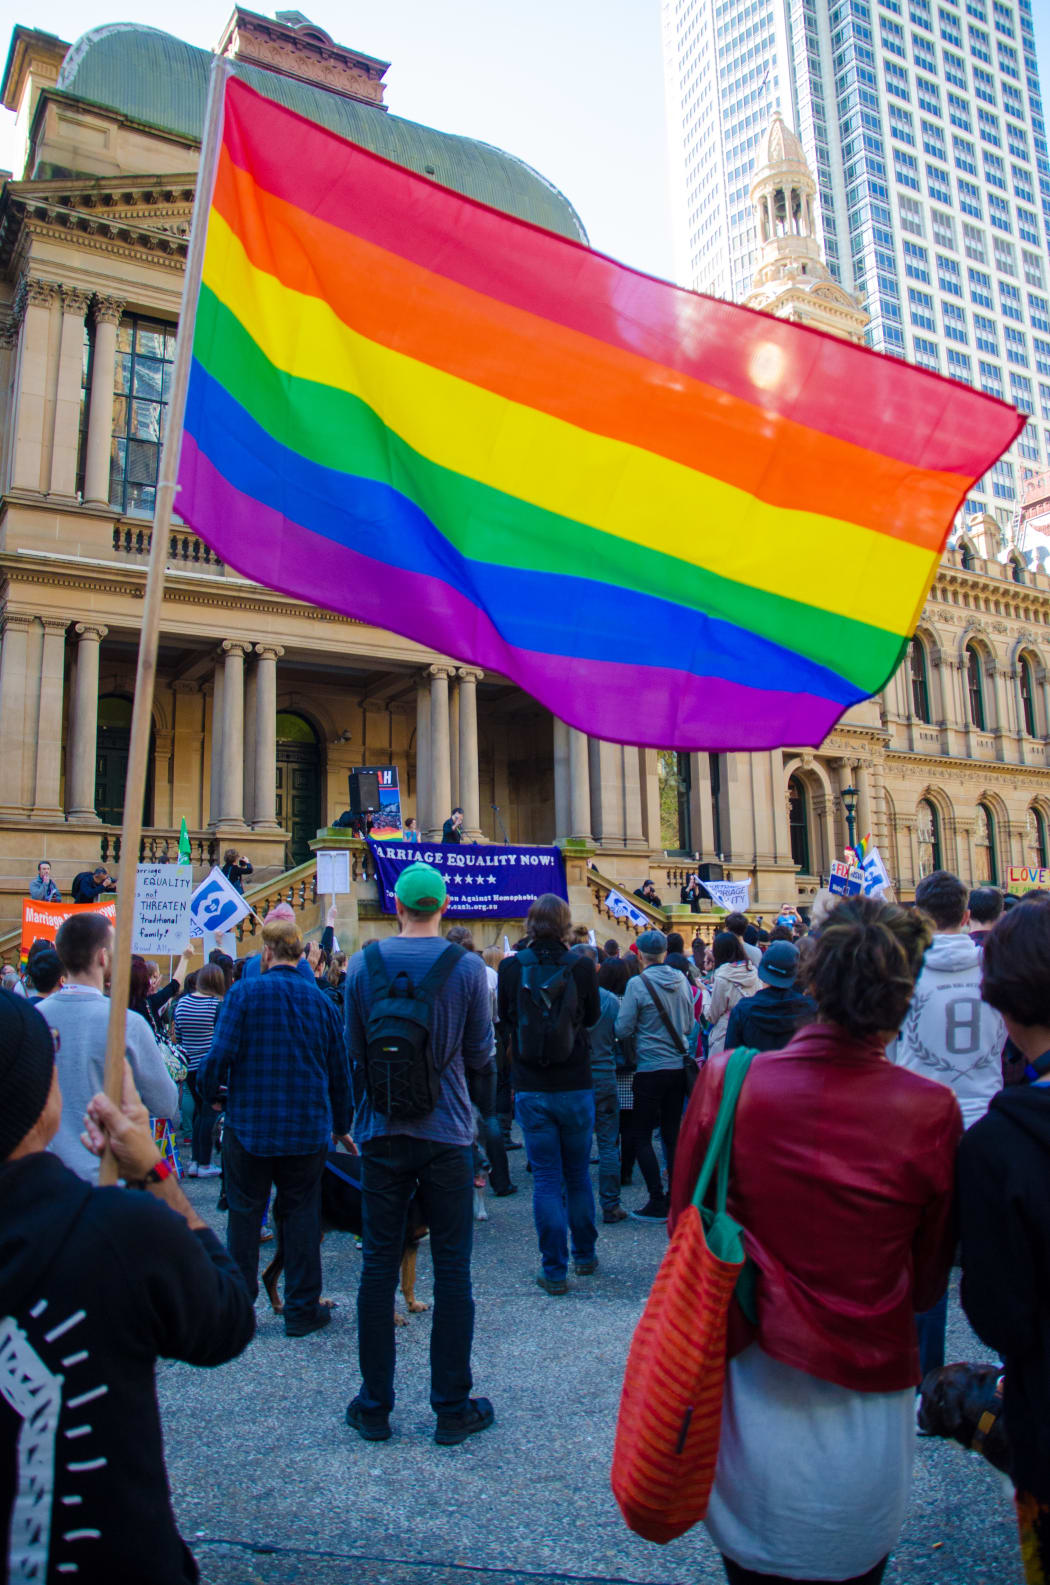 A protester waves a rainbow coloured flag at a marriage equality rally outside Town Hall in Sydney, Australia on August 9, 2015.